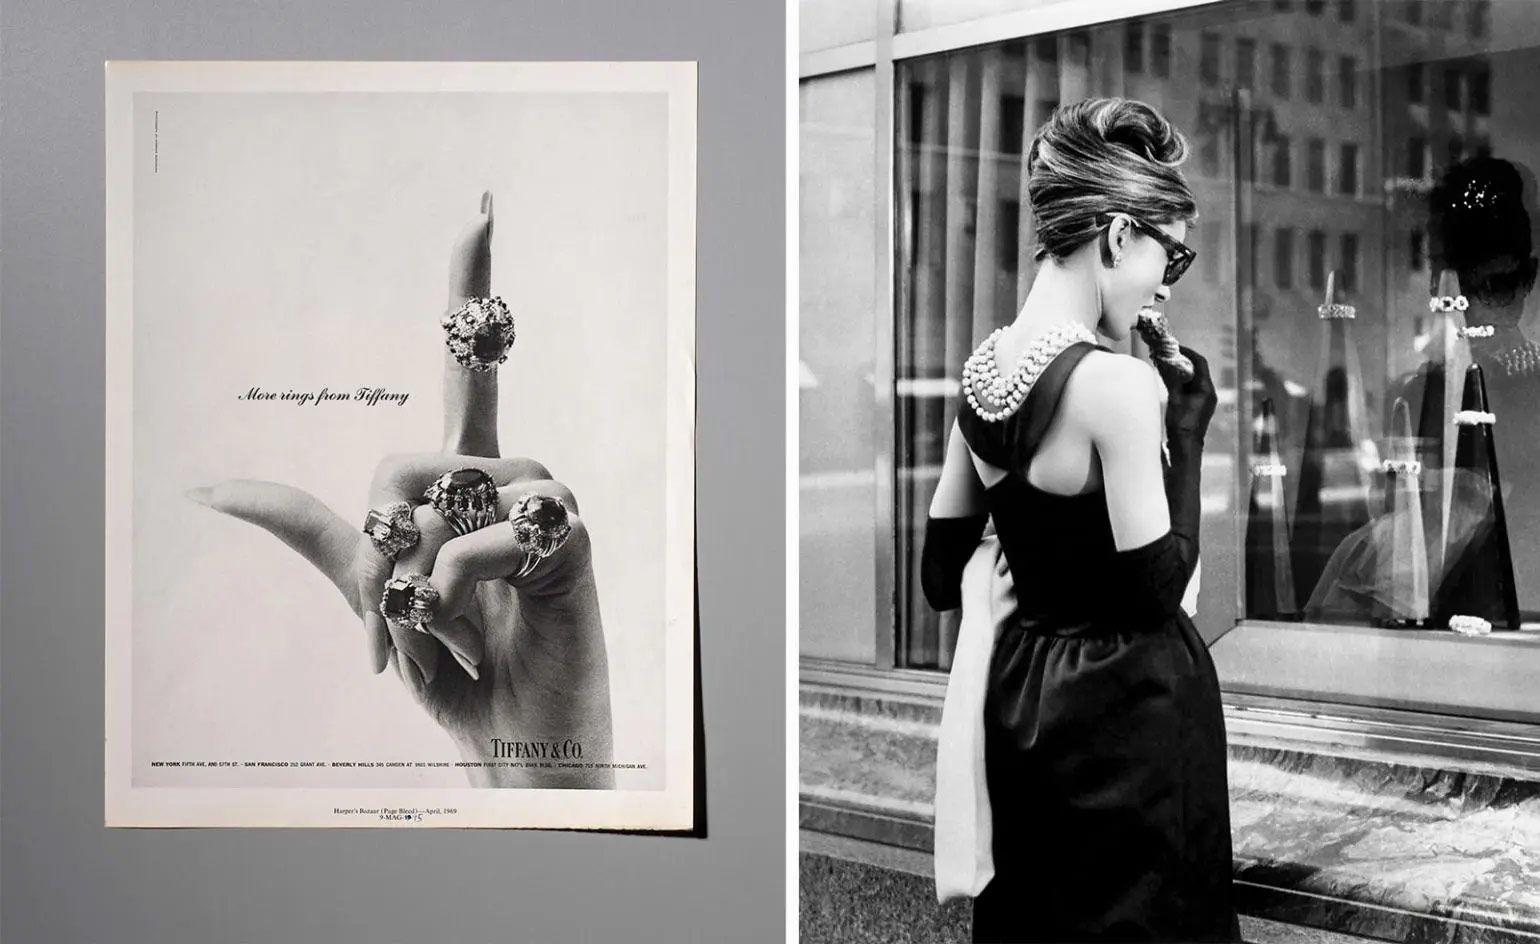 Discover the illustrious history of Tiffany & Co. in next month’s ‘Vision and Virtuosity’ exhibition at Saatchi Gallery